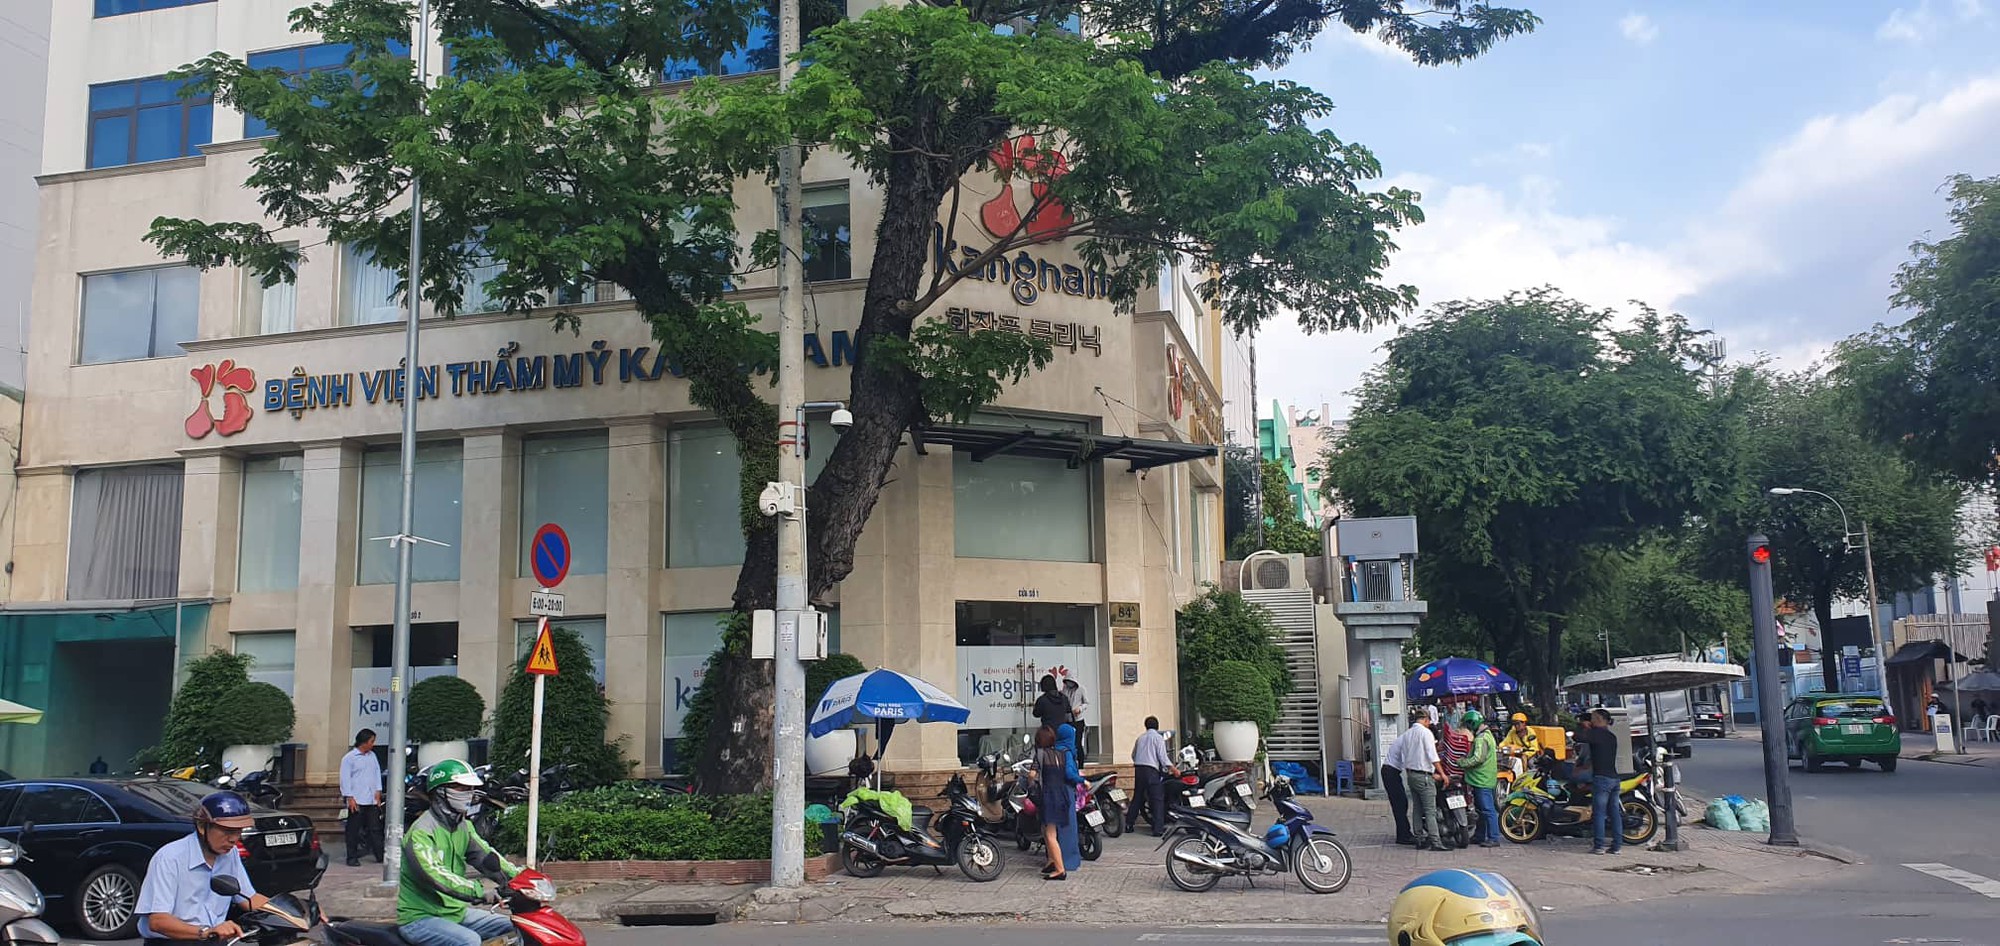 Medical error behind plastic surgery-related death in Ho Chi Minh City: health department